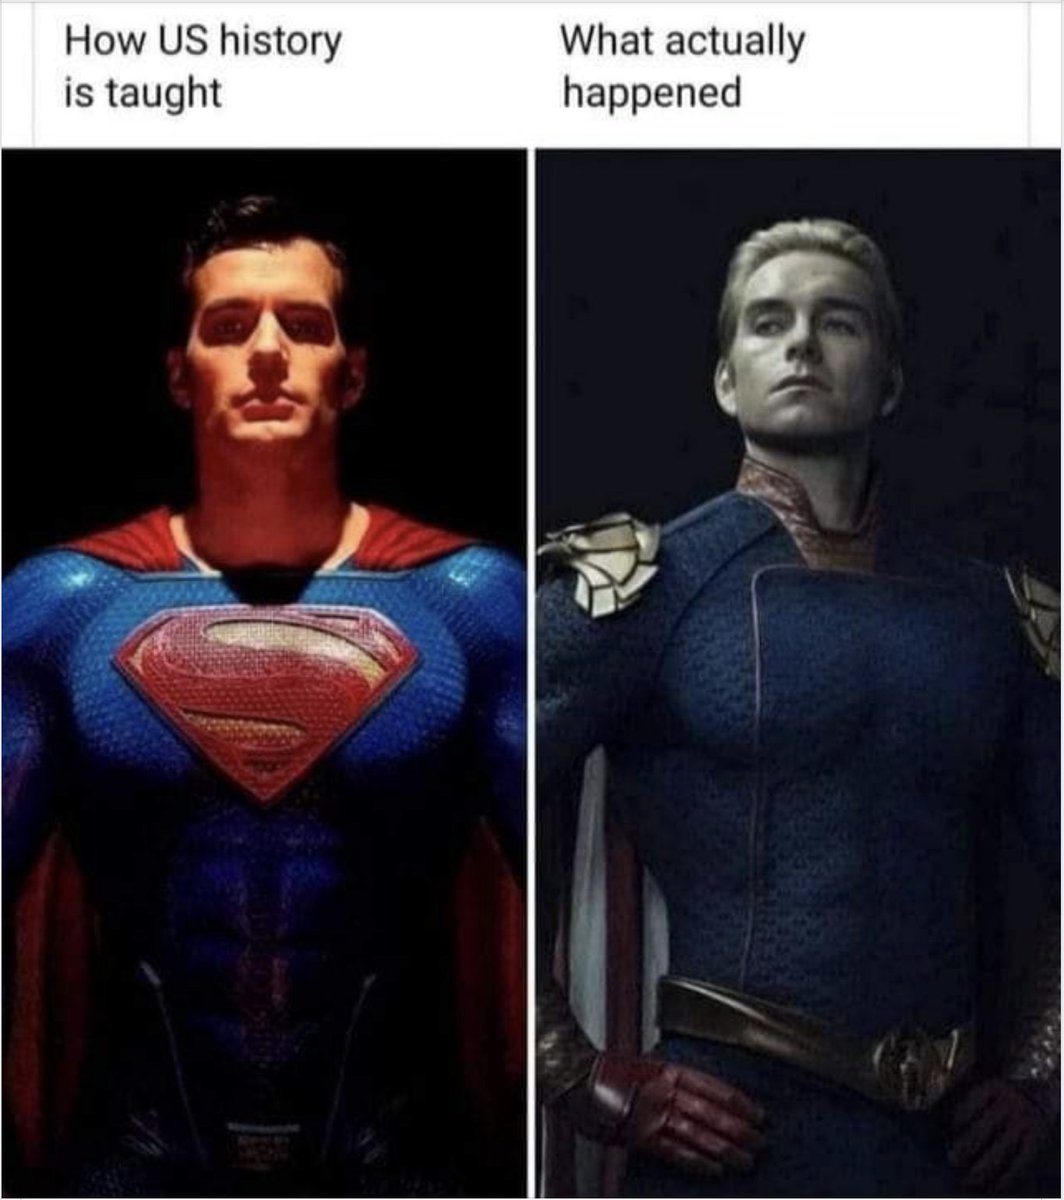 This is a really interesting meme on multiple levels.1) The historical reality is that the U.S. is neither Superman or Homelander.2) Is history told from the perspective of the victor biased? Yes. But guess what- so is history told from the perspective of the loser or victim.